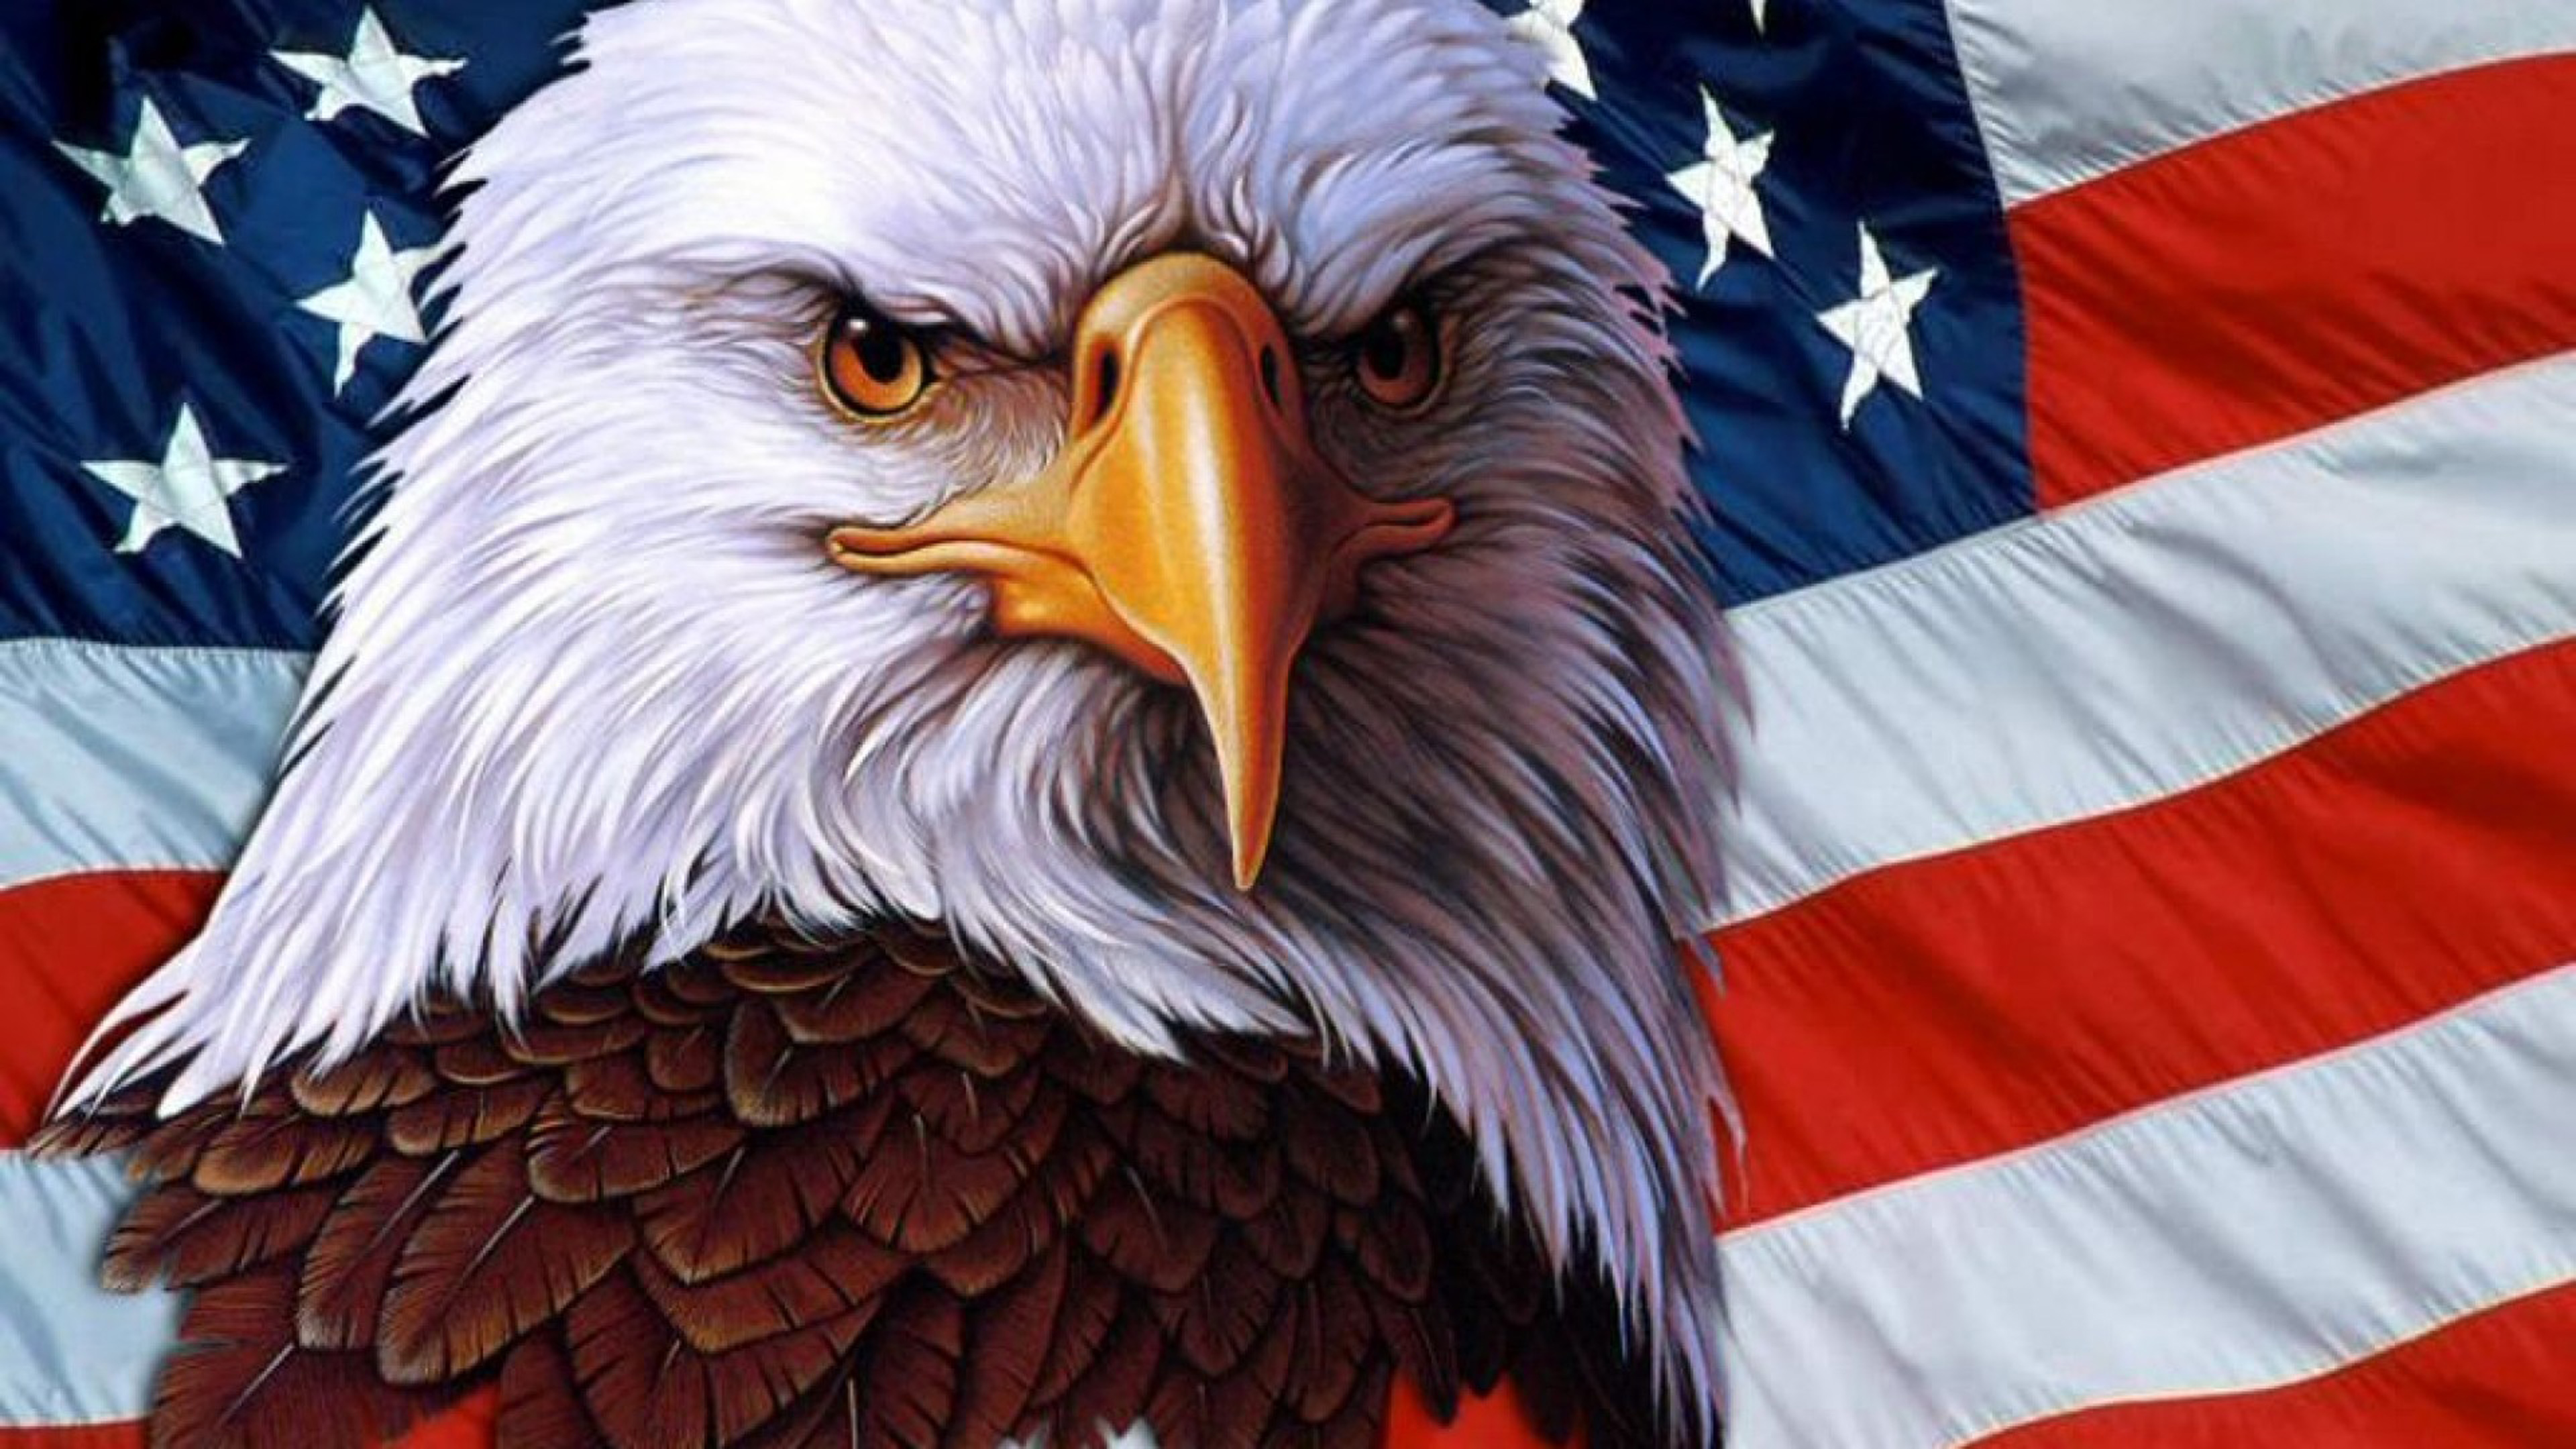 American Eagle Symbol Usa Independence Freedom 3840x216 : Wallpapers13.com